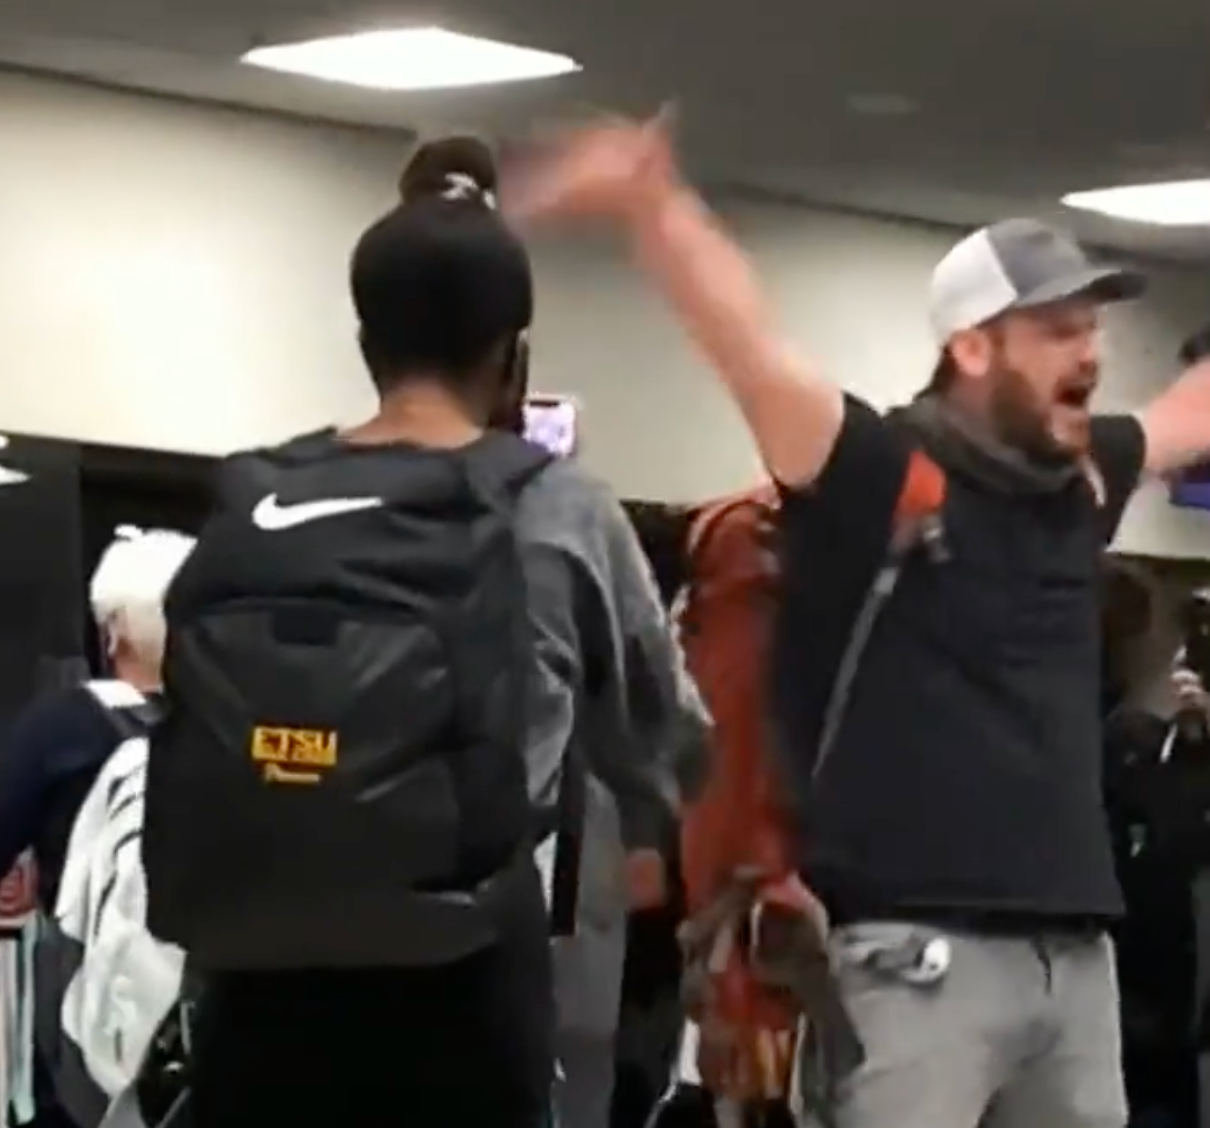 A screaming man tried to start an anti-mask revolution at an Atlanta airport, but found few takers